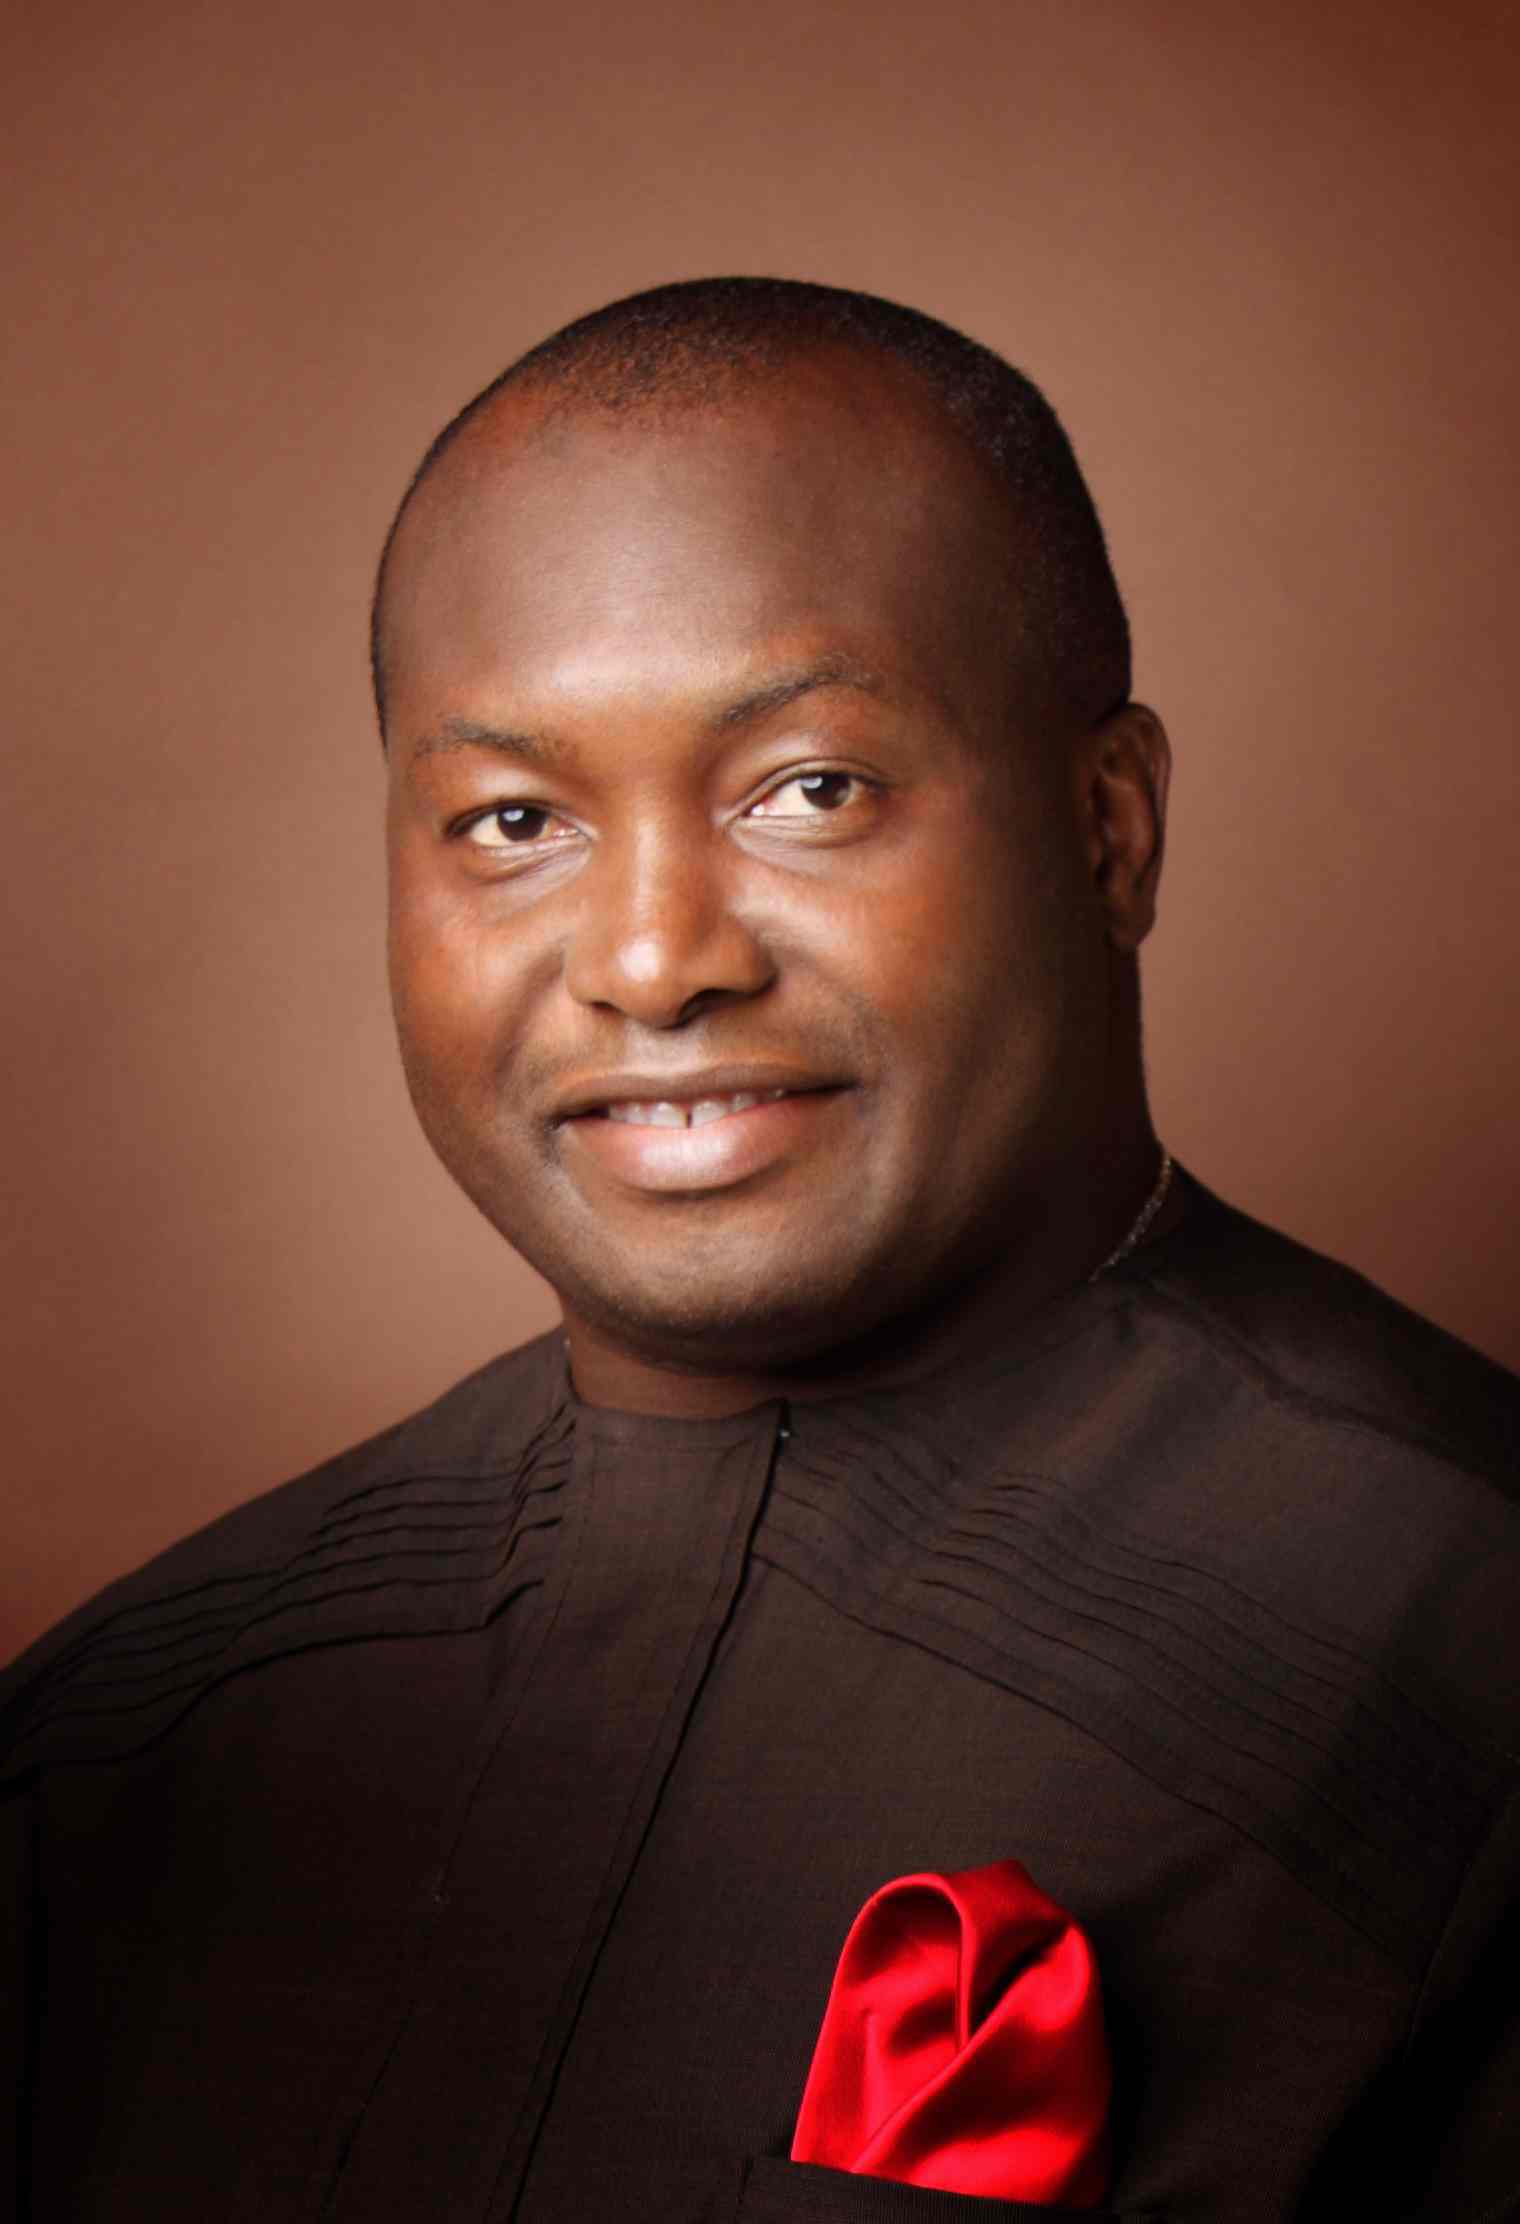 Soonest igbos cry of marginalization will end - Ifeanyi Ubah